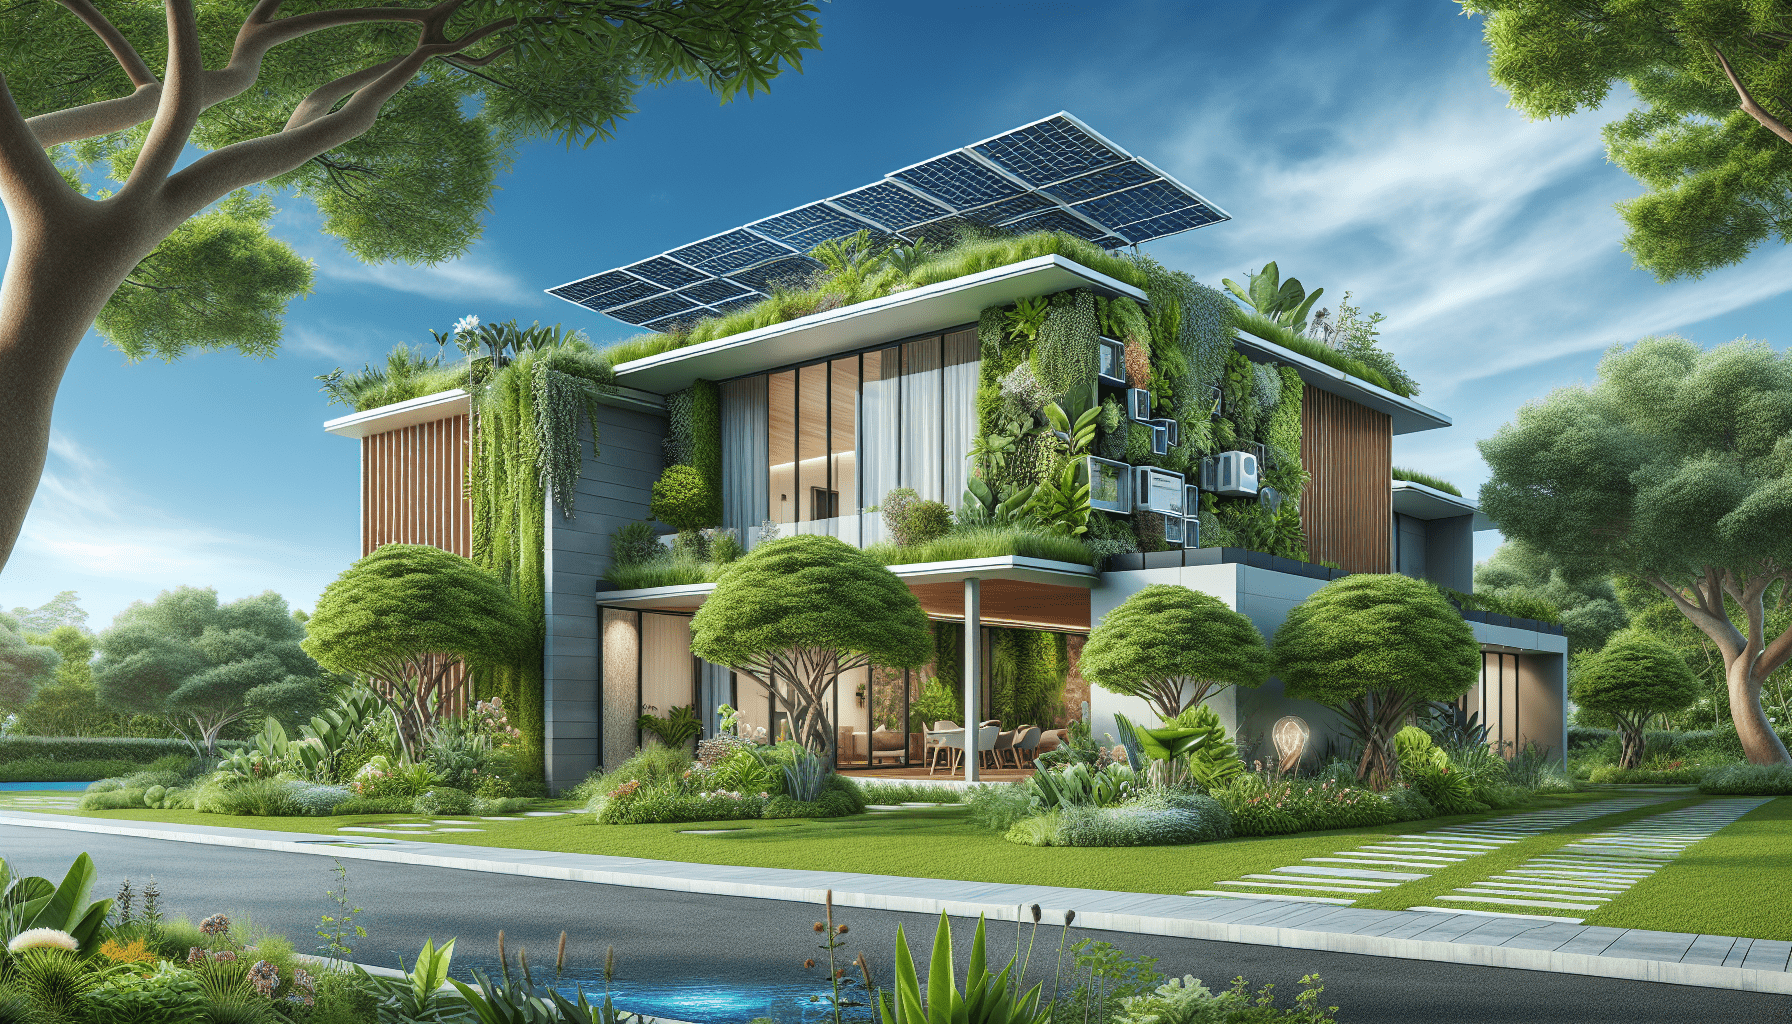 Designing an Eco-Friendly Home for Sustainable Living